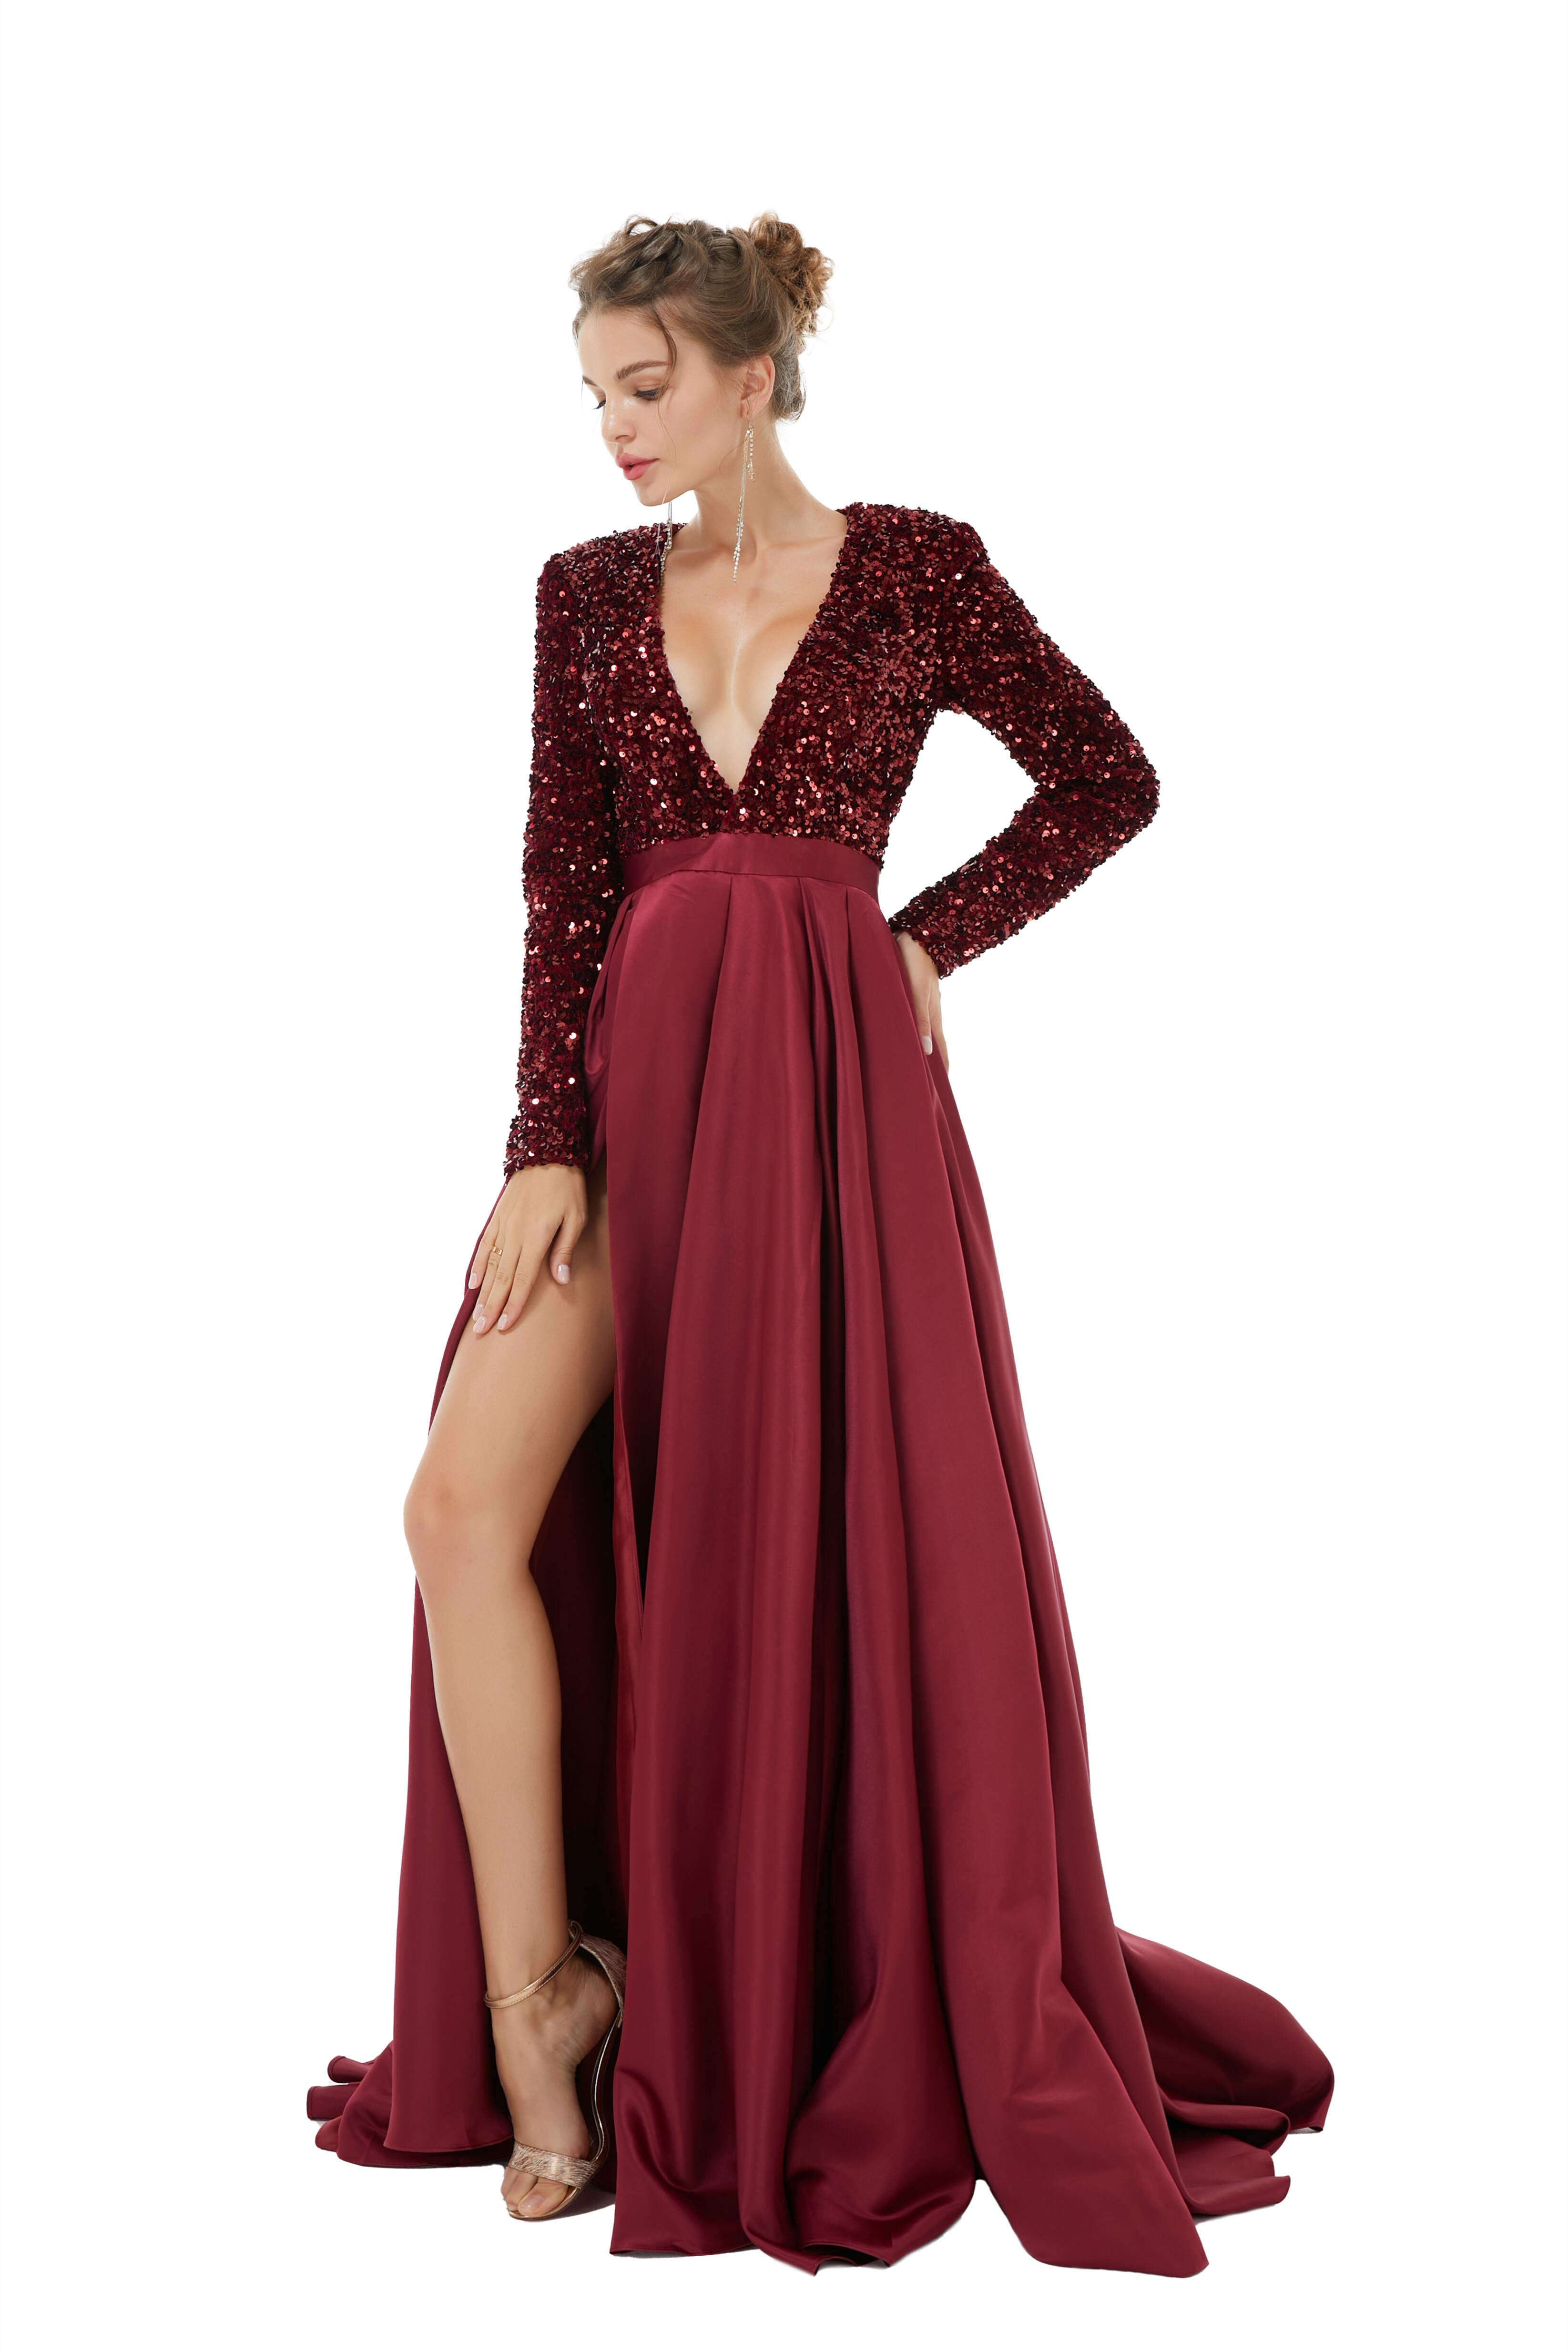 Party Dresses For 41 Year Olds, Sequined Satin A Line Front Slit V Neck Full Sleeve Sweep Train Long Prom Dresses